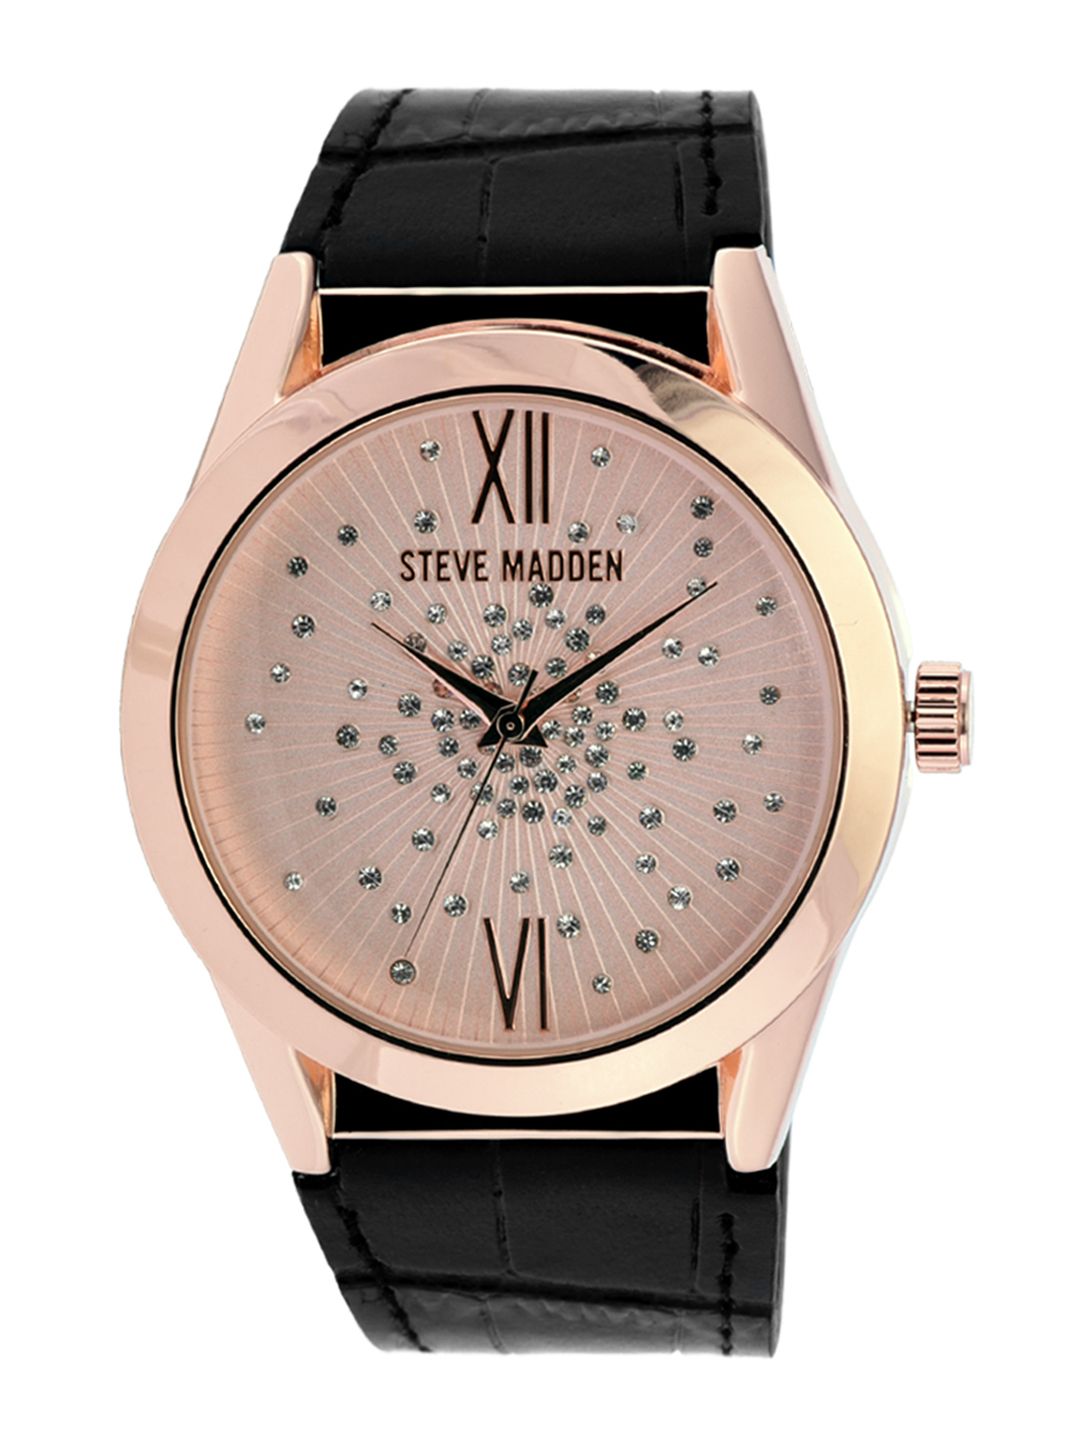 Steve Madden Women Gold-Toned Leather Analogue Watch SMW258Q Price in India